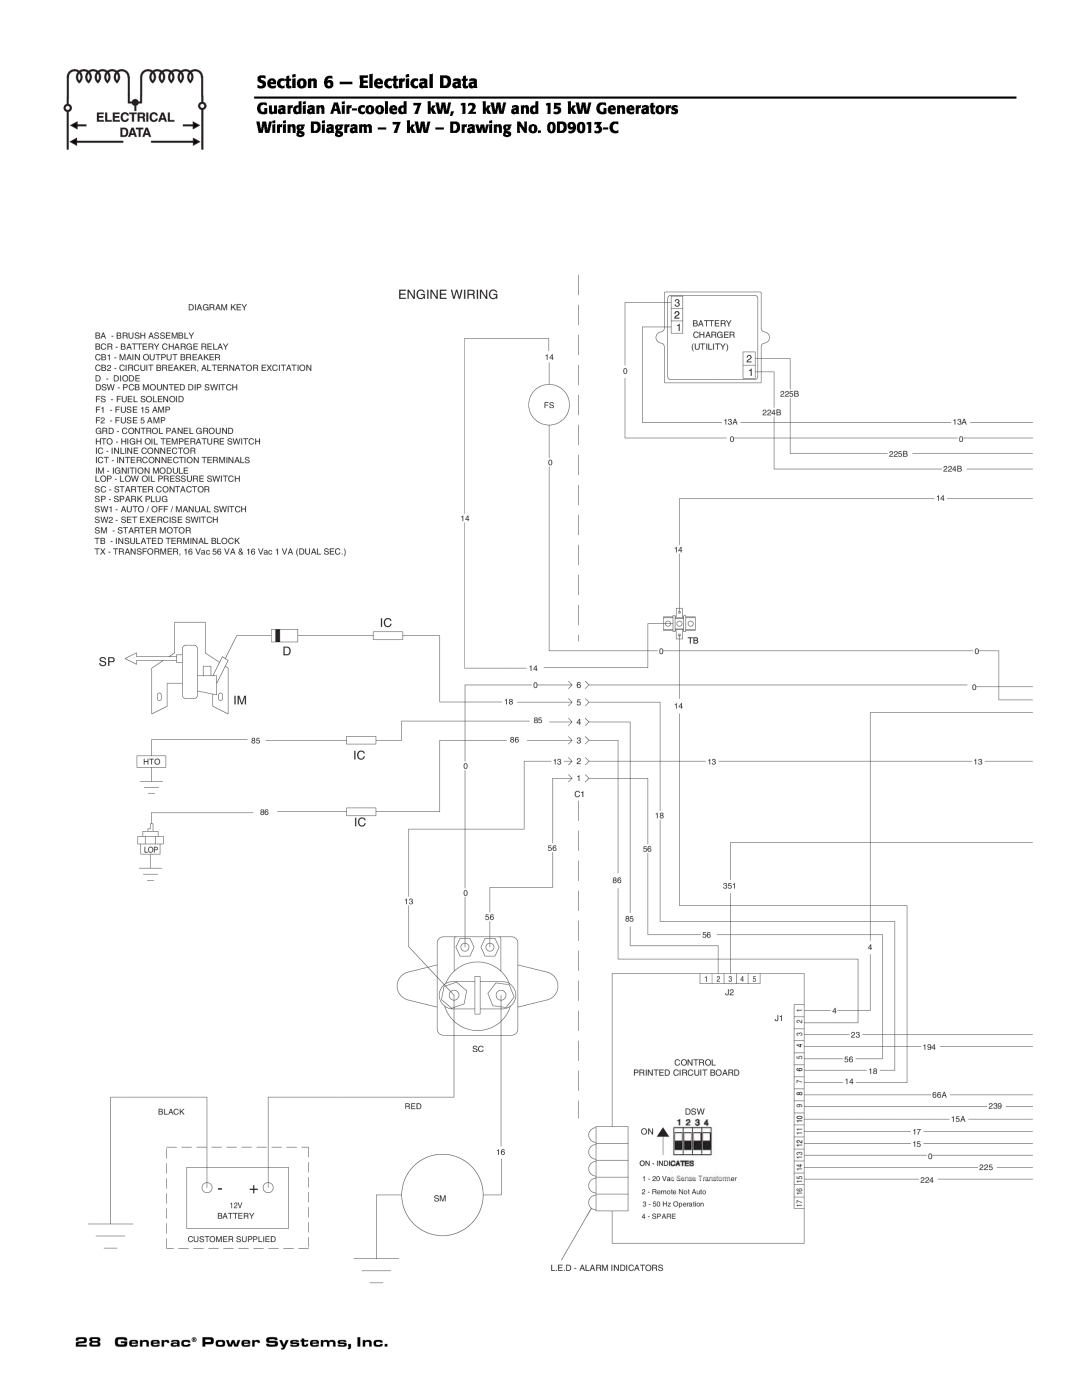 Generac Power Systems 04758-2, 04759-2, 04760-2 owner manual Electrical Data, Generac Power Systems, Inc, Engine Wiring 